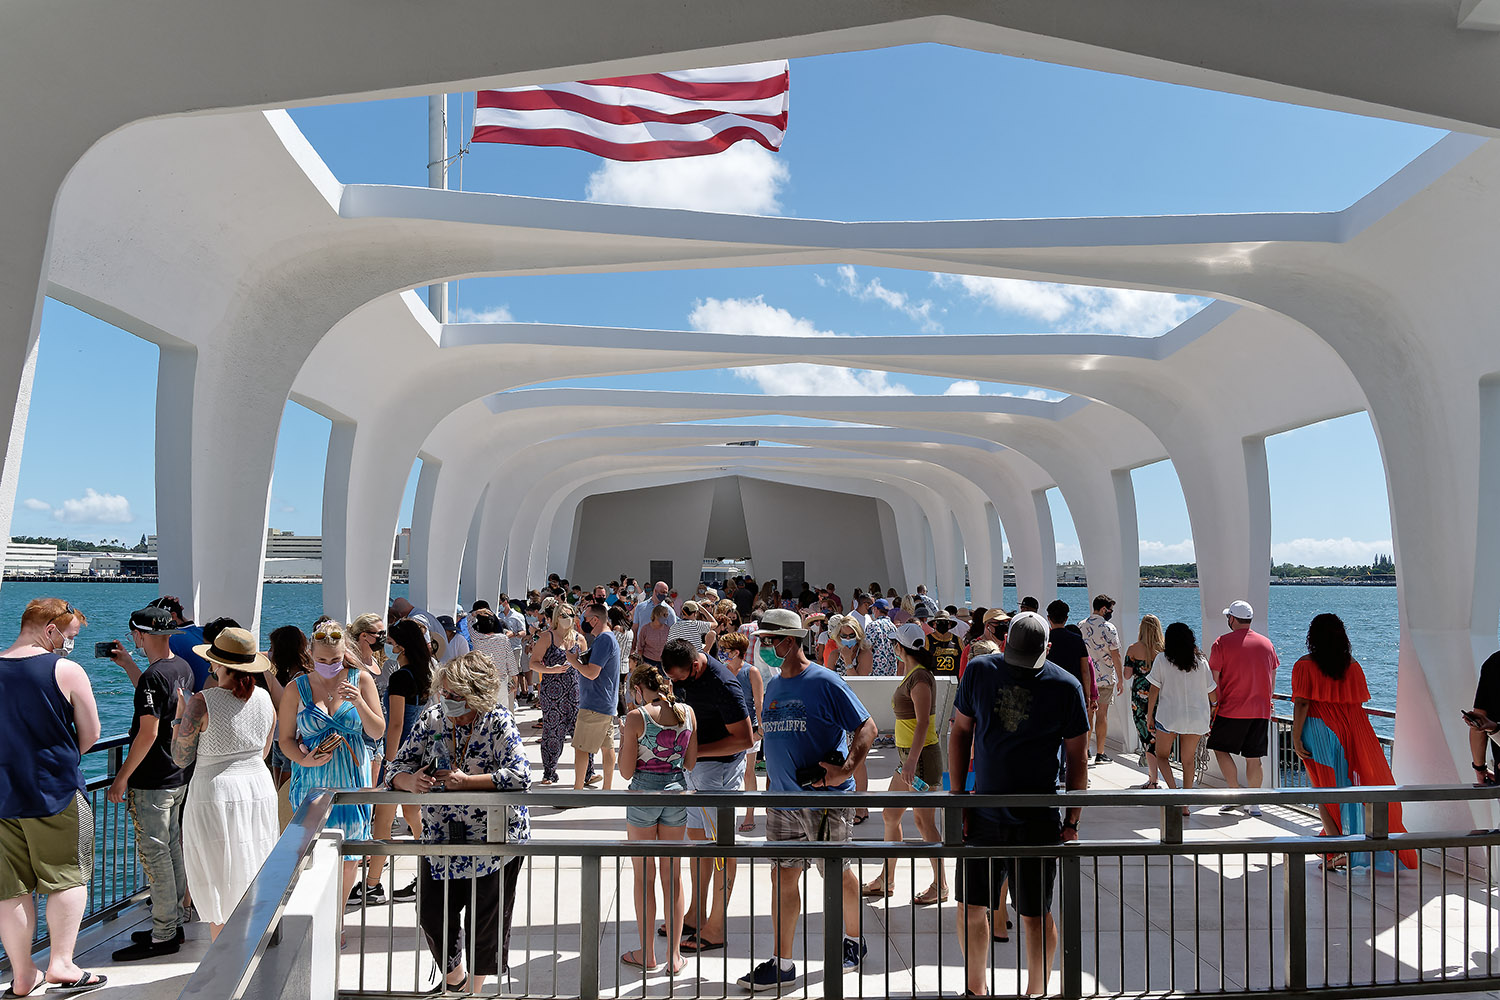 There were quite a few visitors inside the Arizona memorial